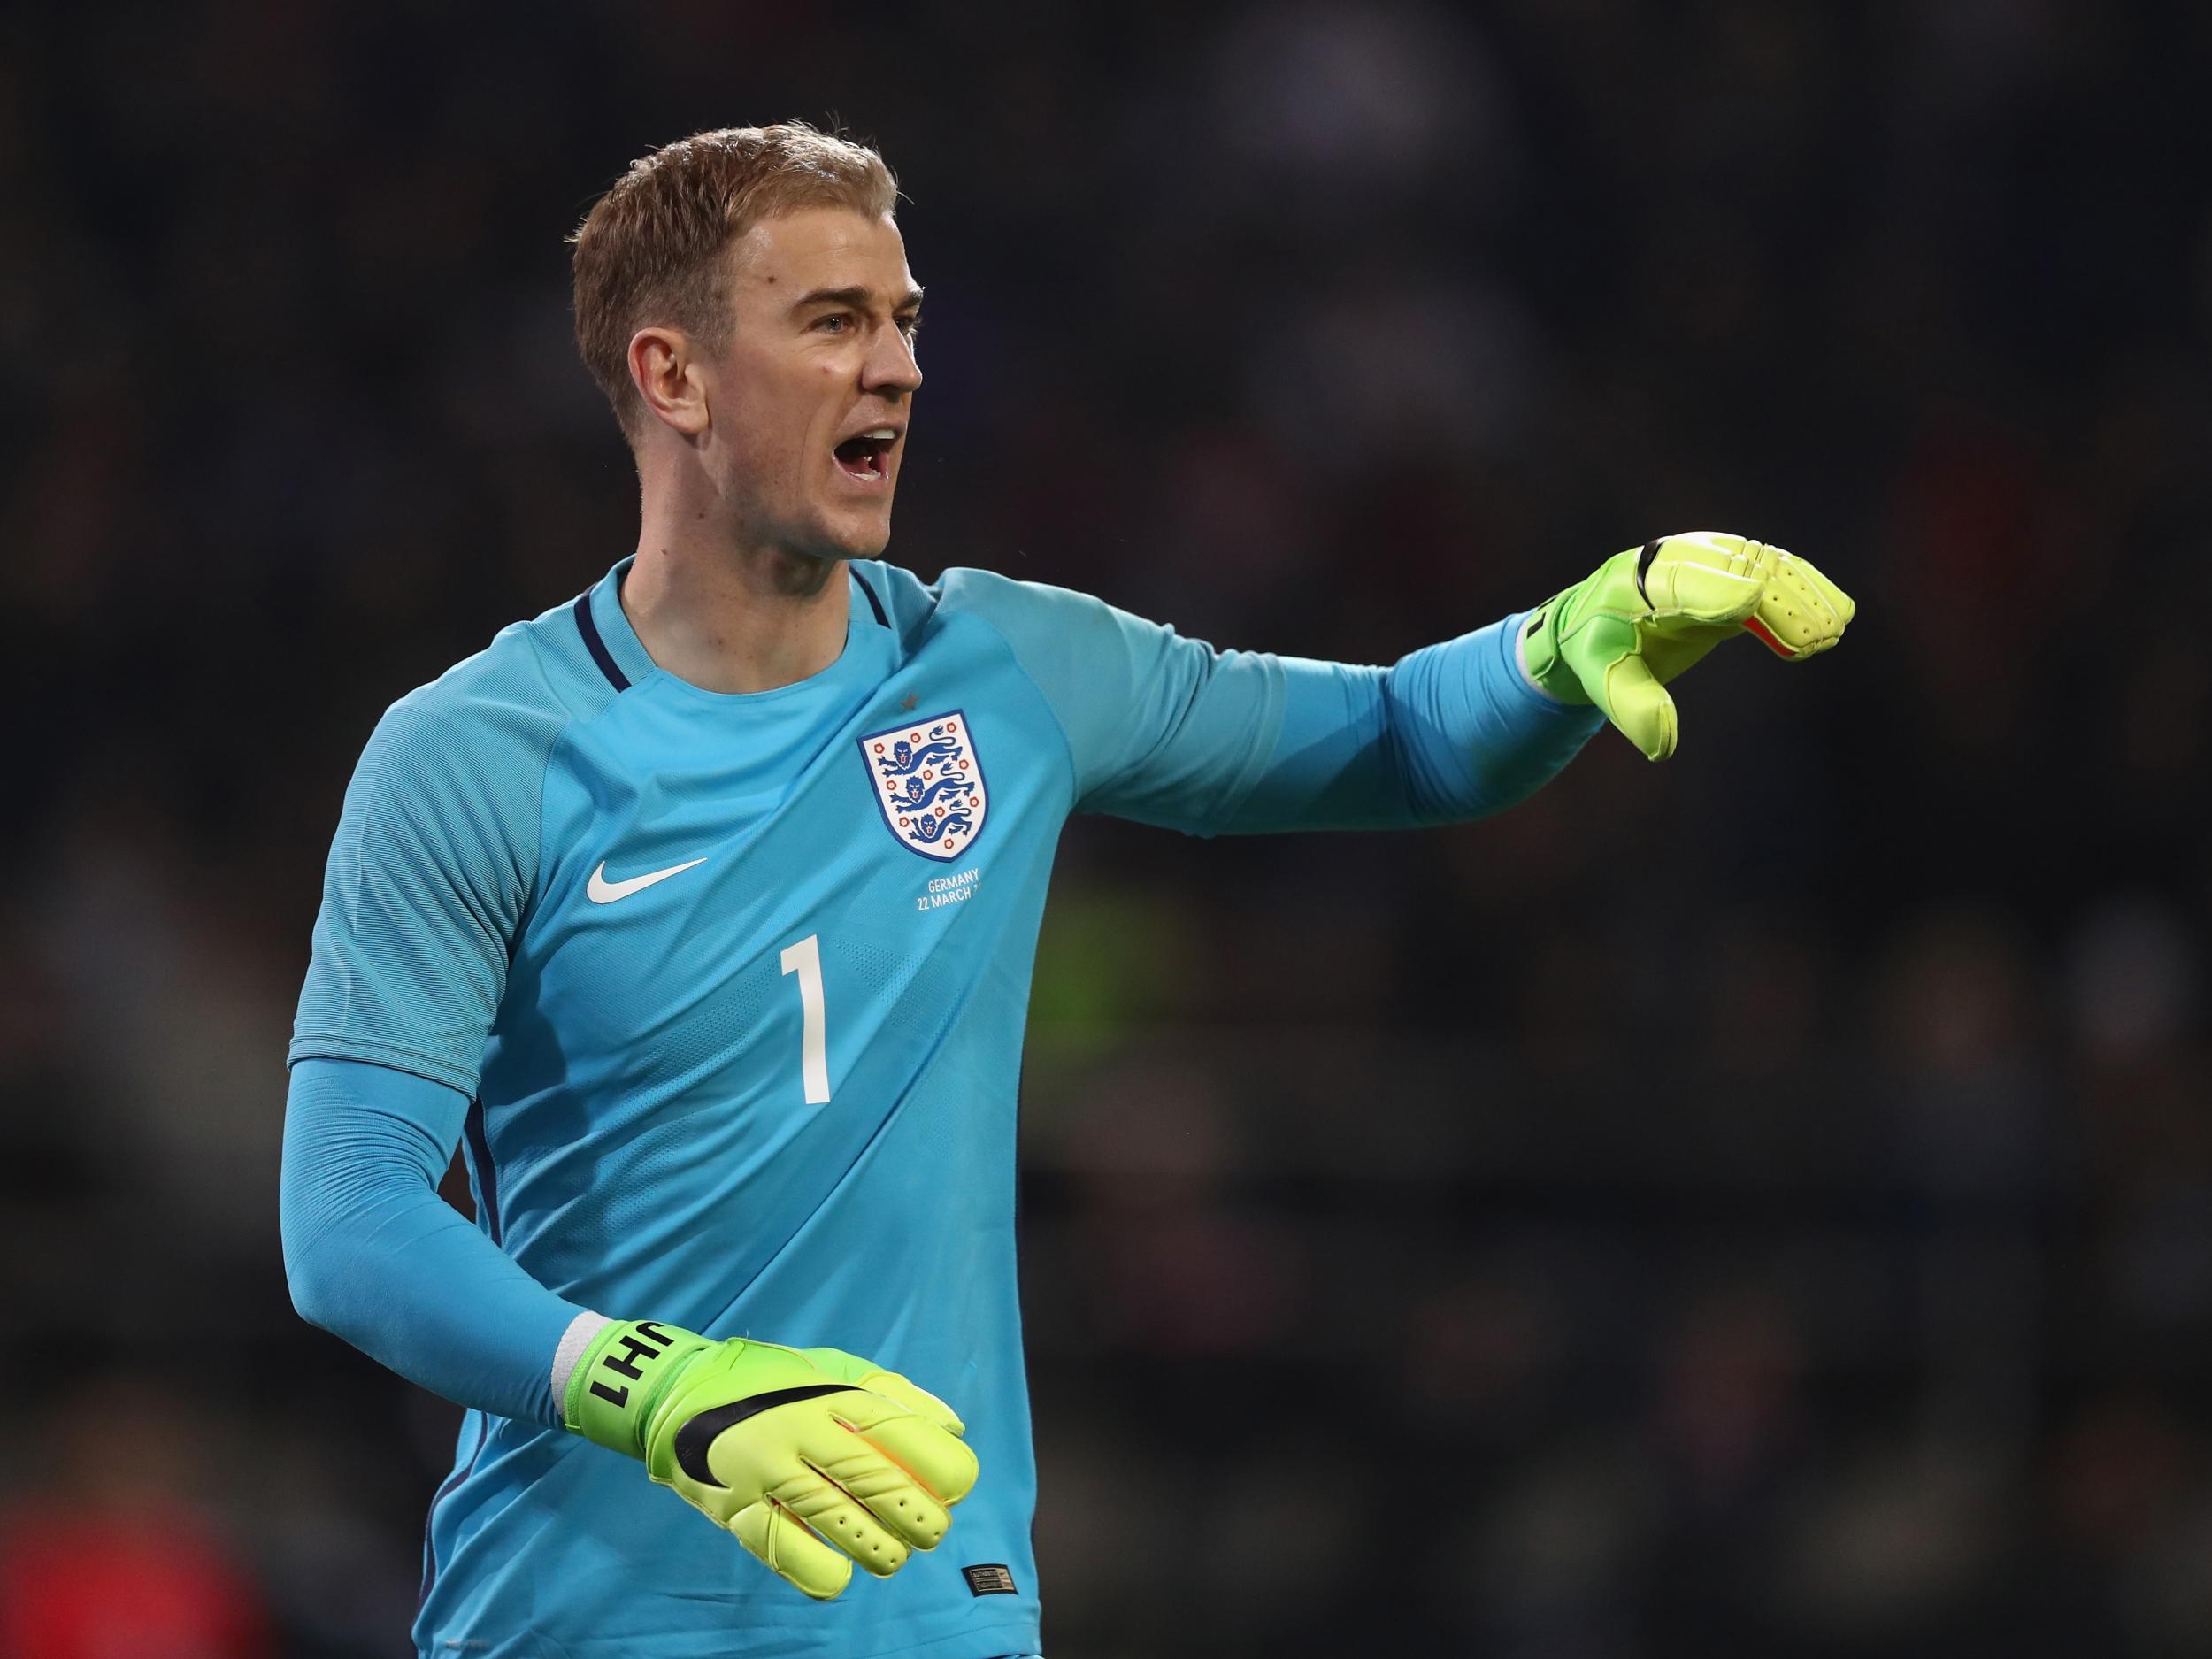 Hart insisted that all players should be taking responsibility, not just the captain